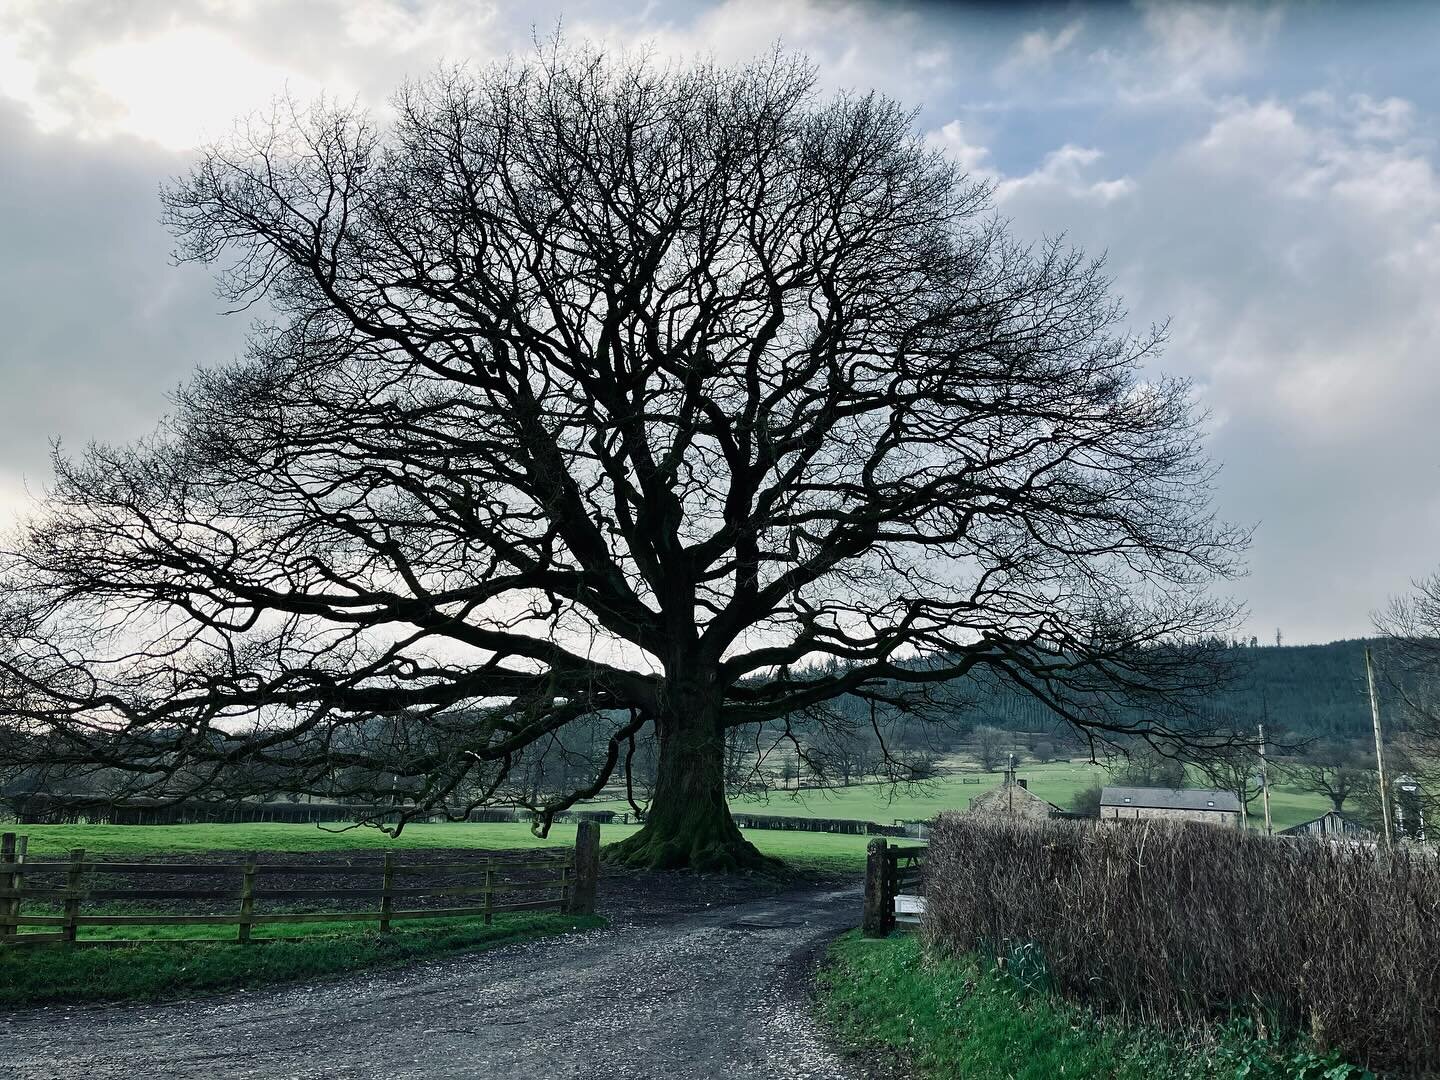 Here&rsquo;s an update on my favourite Tree of the Day, the oak at the top of Chaigley. No signs of coming into leaf yet of course, but you can be sure that deep beneath the ground things are beginning to stir. Spring is just around the corner.